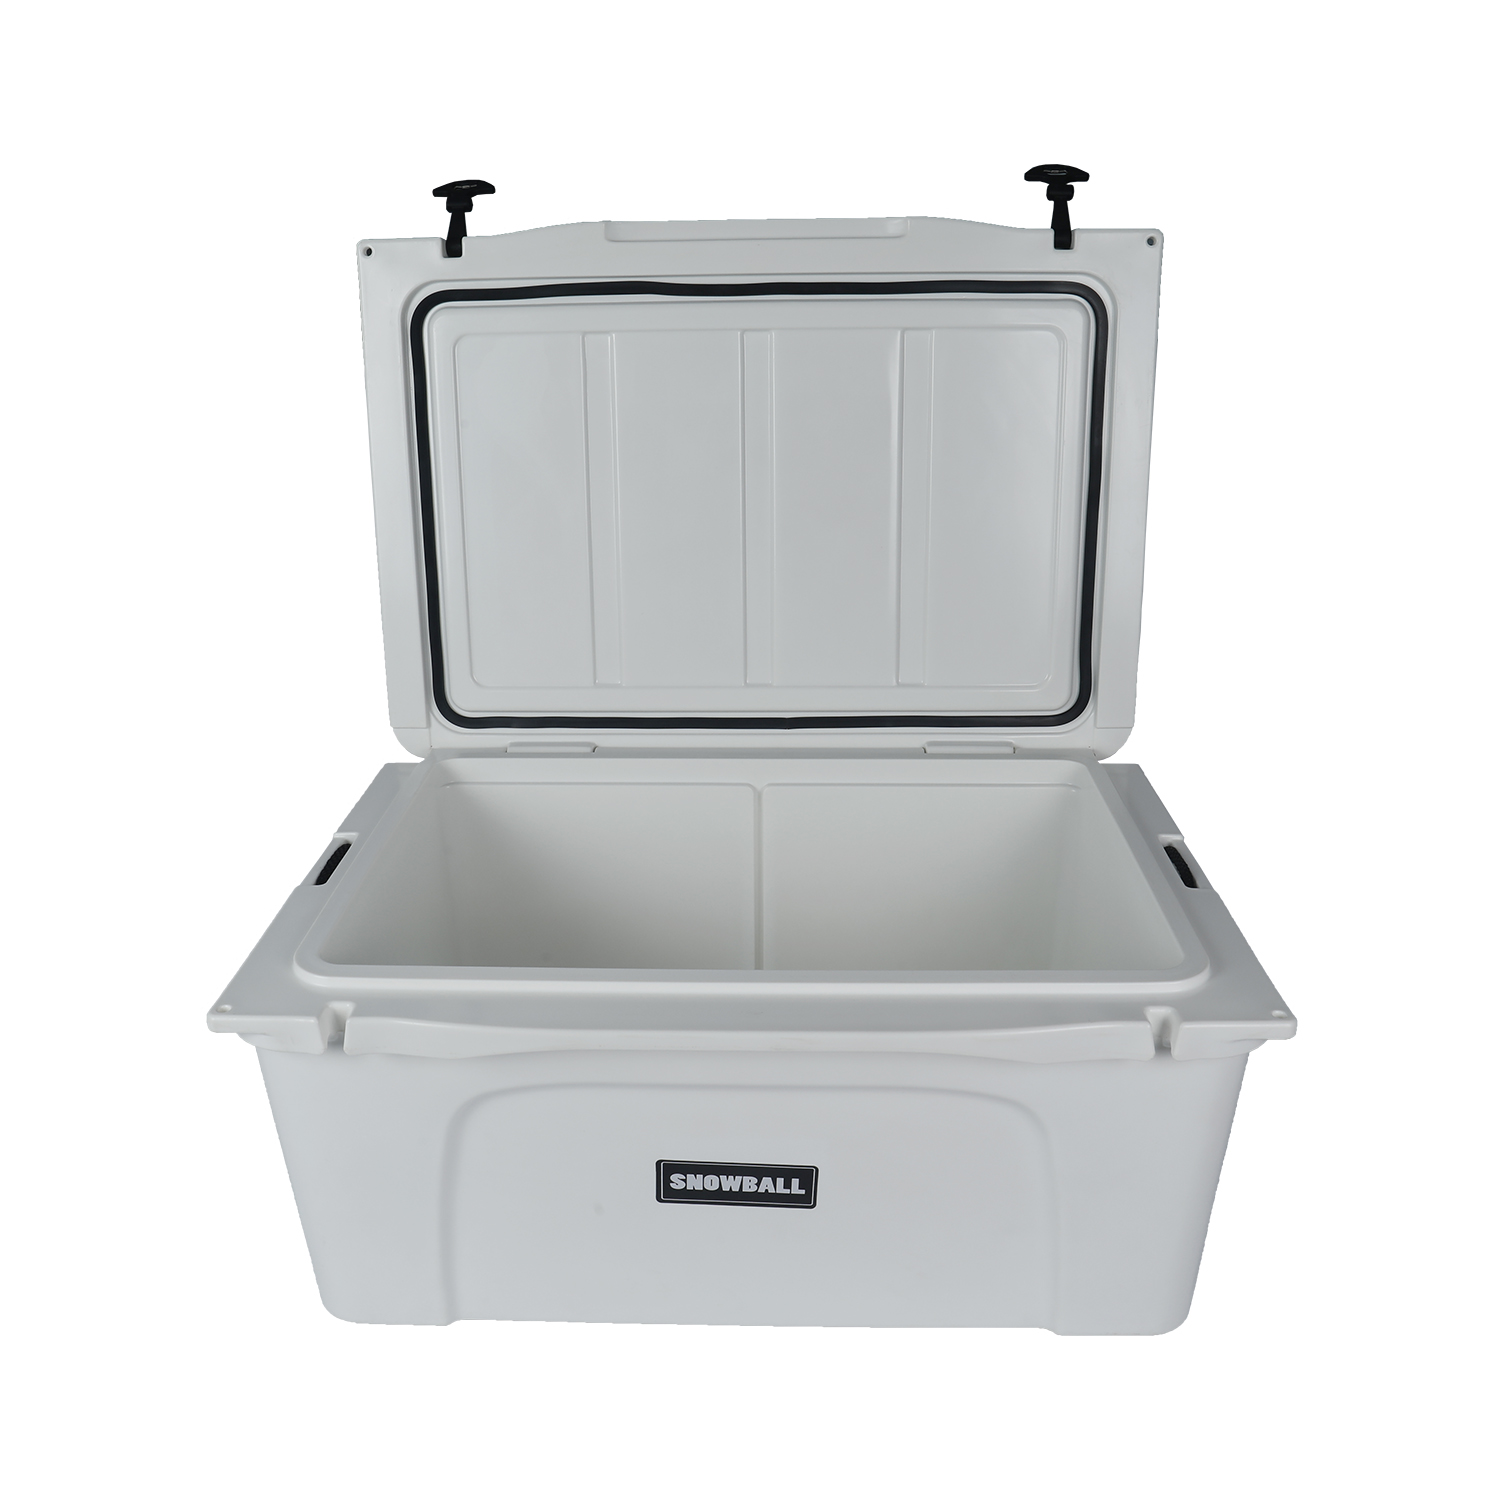 Snowball Coolers for Camping, Fishing, Hunting, BBQs & Outdoor Activities, White,116QT(110L)